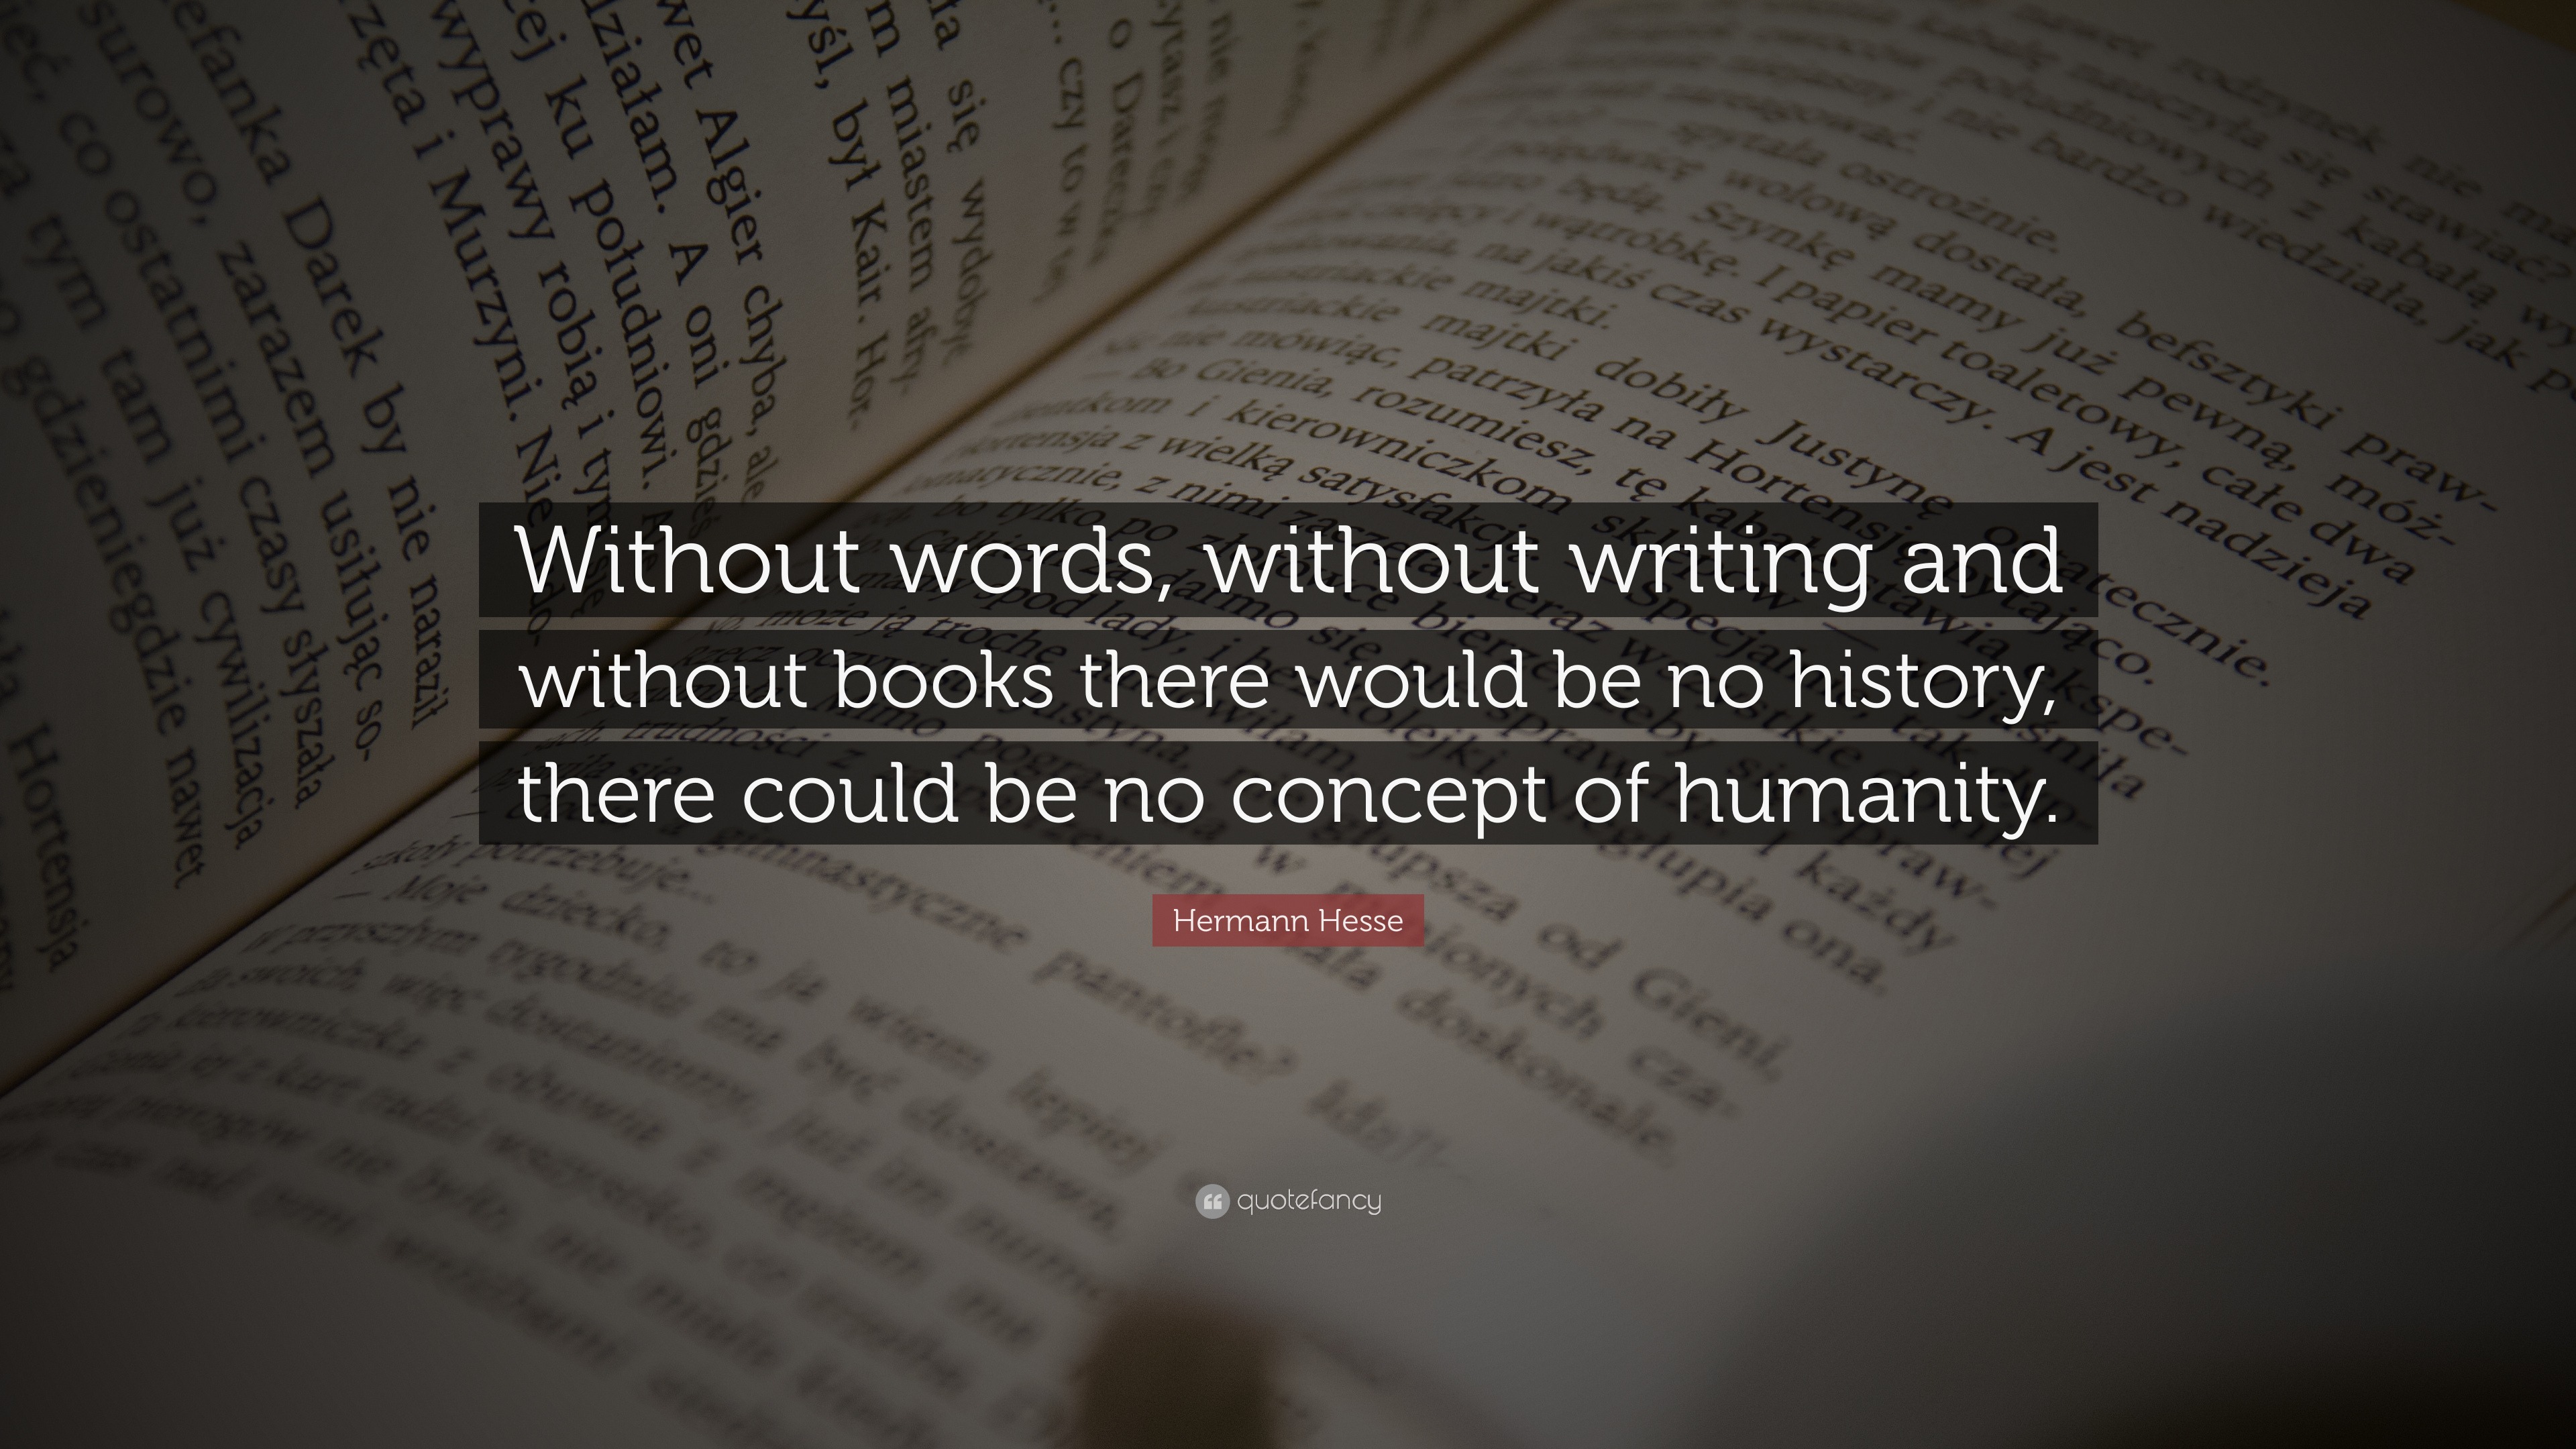 Hermann Hesse Quote: “Without words, without writing and without books